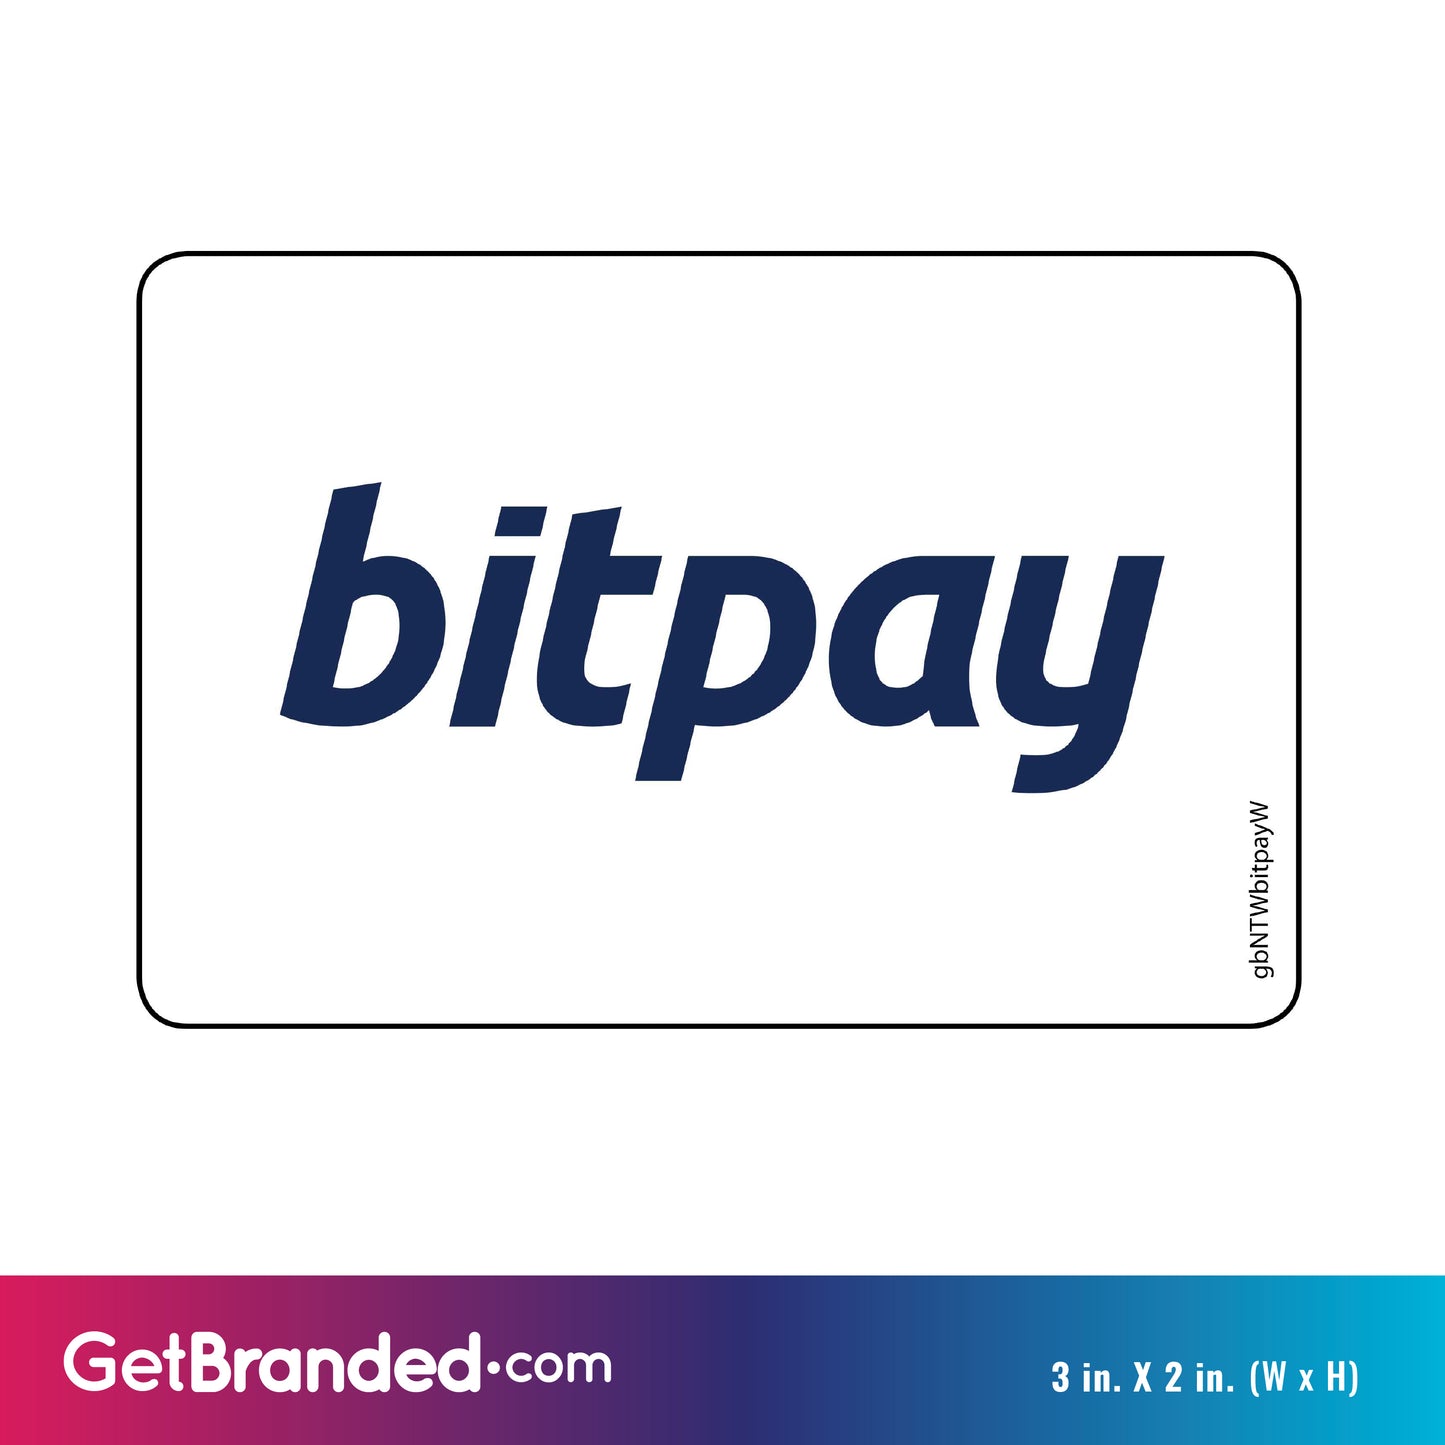 Single Network Decal, Bitpay Decal size guide. 3 inches by 2 inches in size.